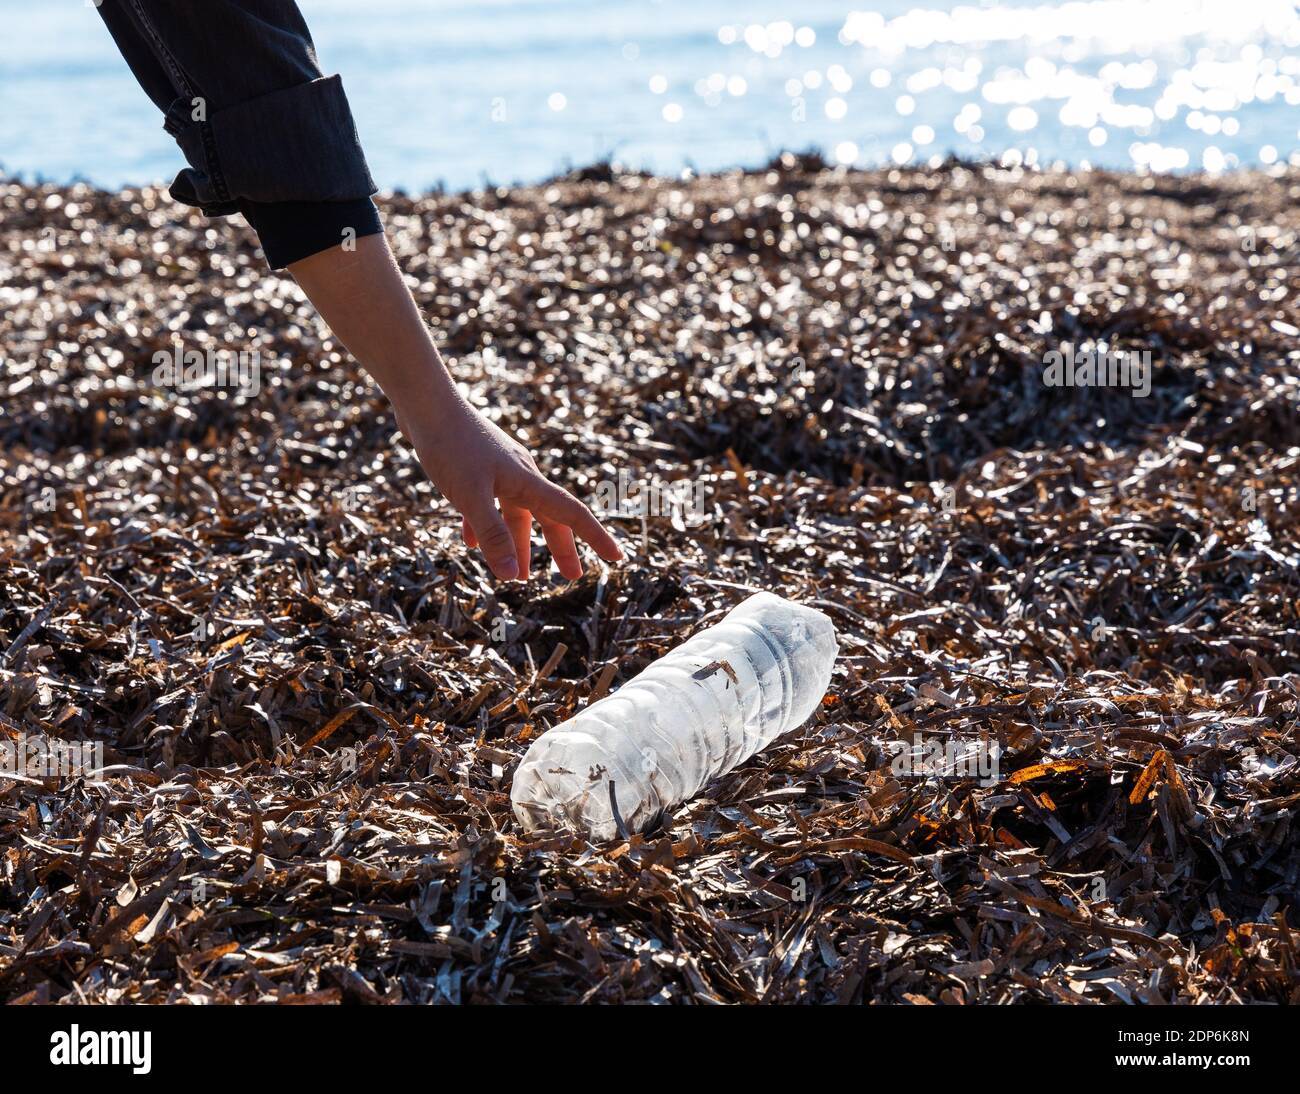 Environmental and Sea pollution concept, Garbage, lady's hand collecting waste plastic bottles plastic water bottle, on the beach shore. Stock Photo